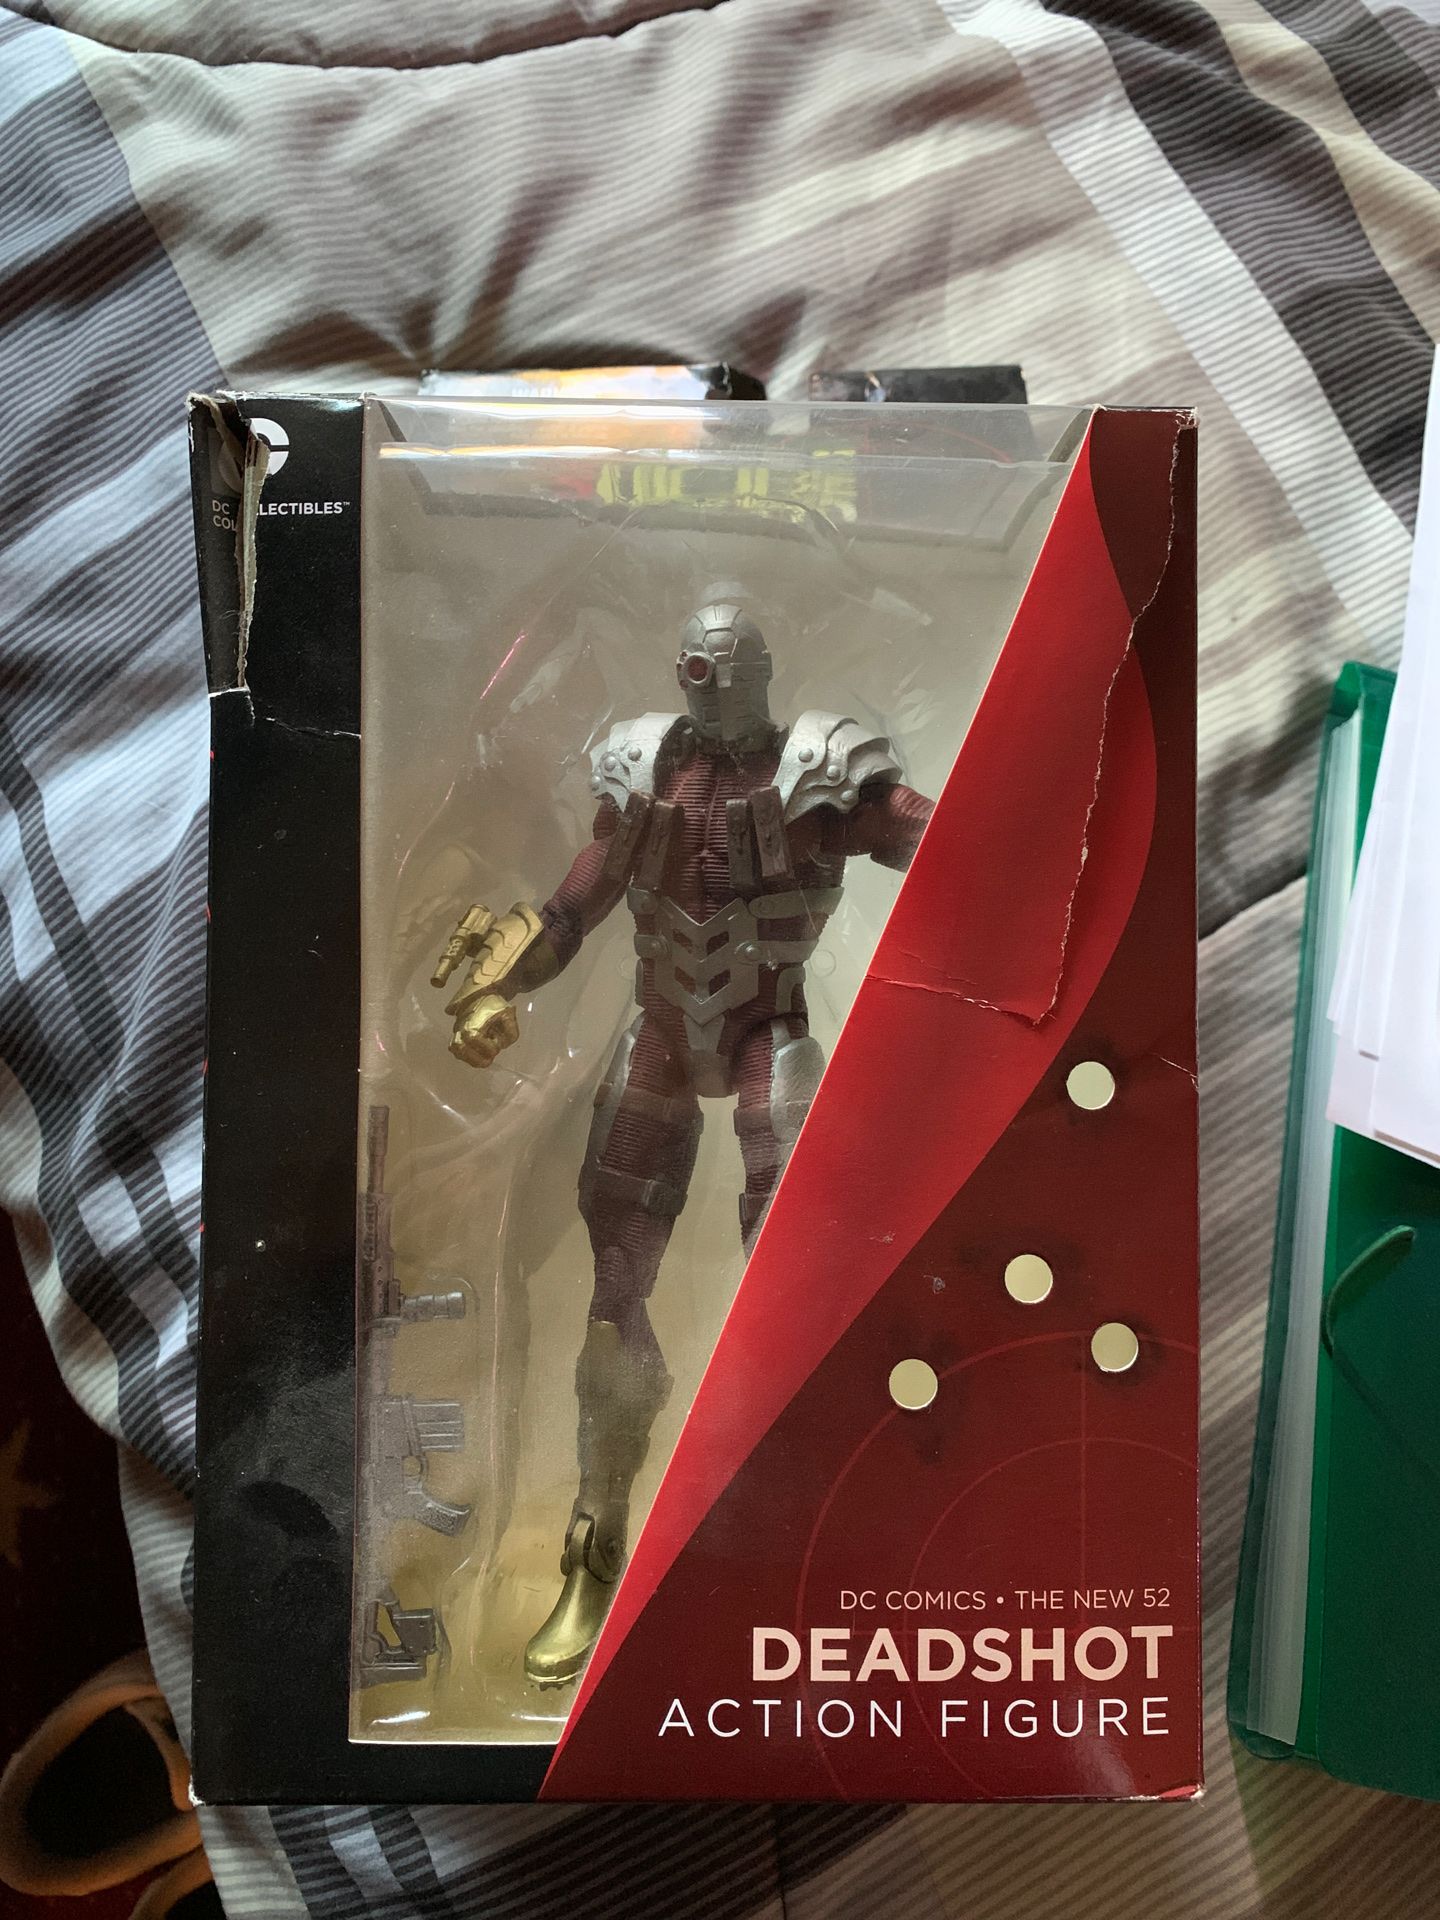 Dead shot action figure collectible box opened